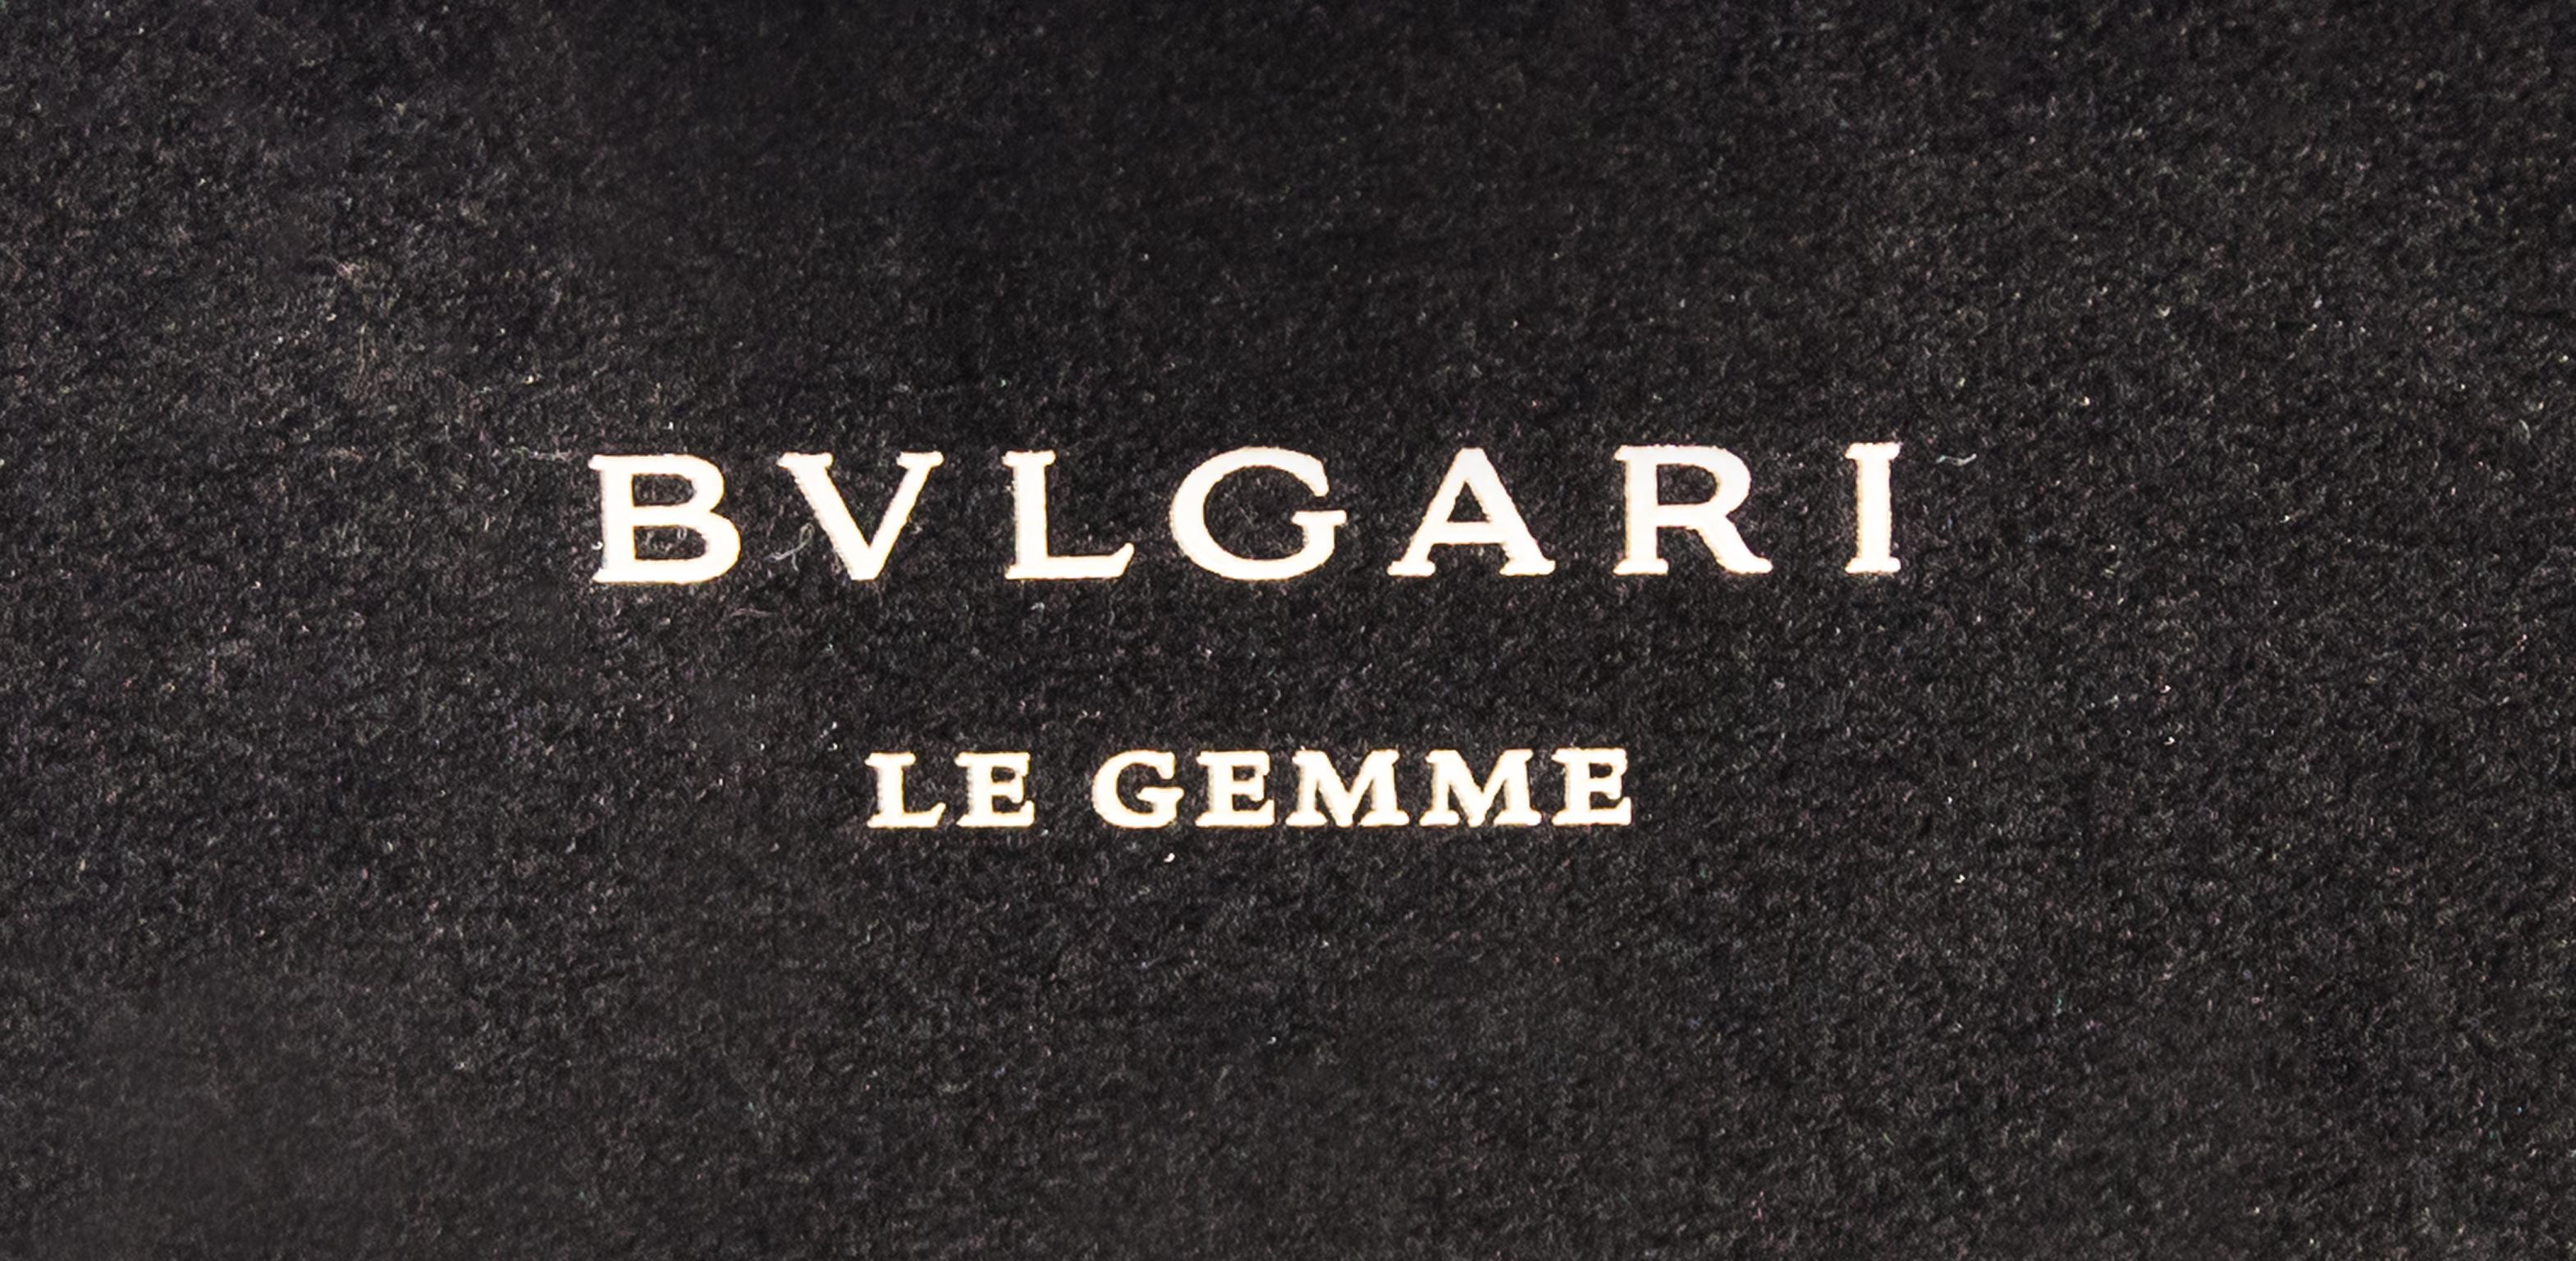 Huge Bvlgari China Lacquer Jewelry Le Gemme Box For Sale 4